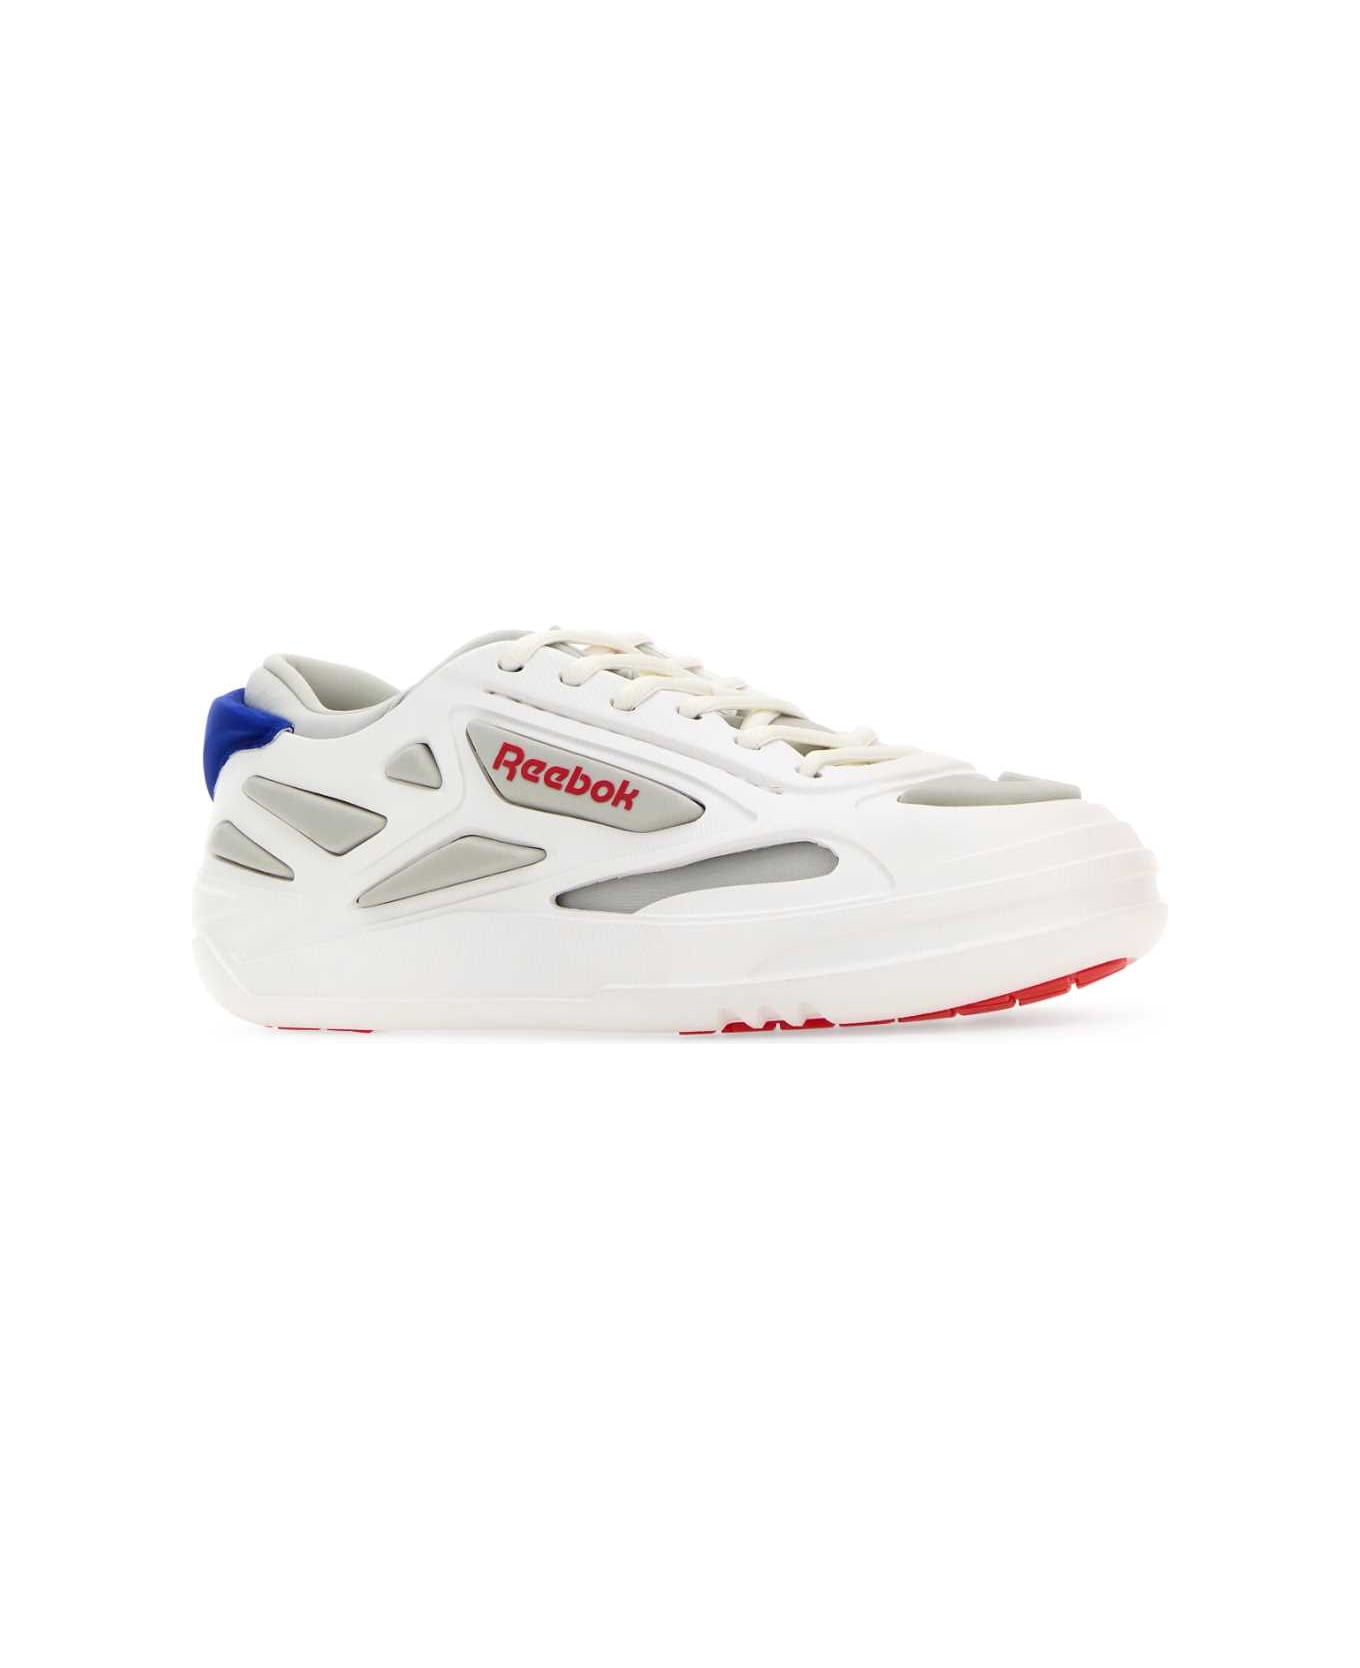 Reebok Multicolor Fabric And Rubber Future Club C Sneakers - BLUE スニーカー